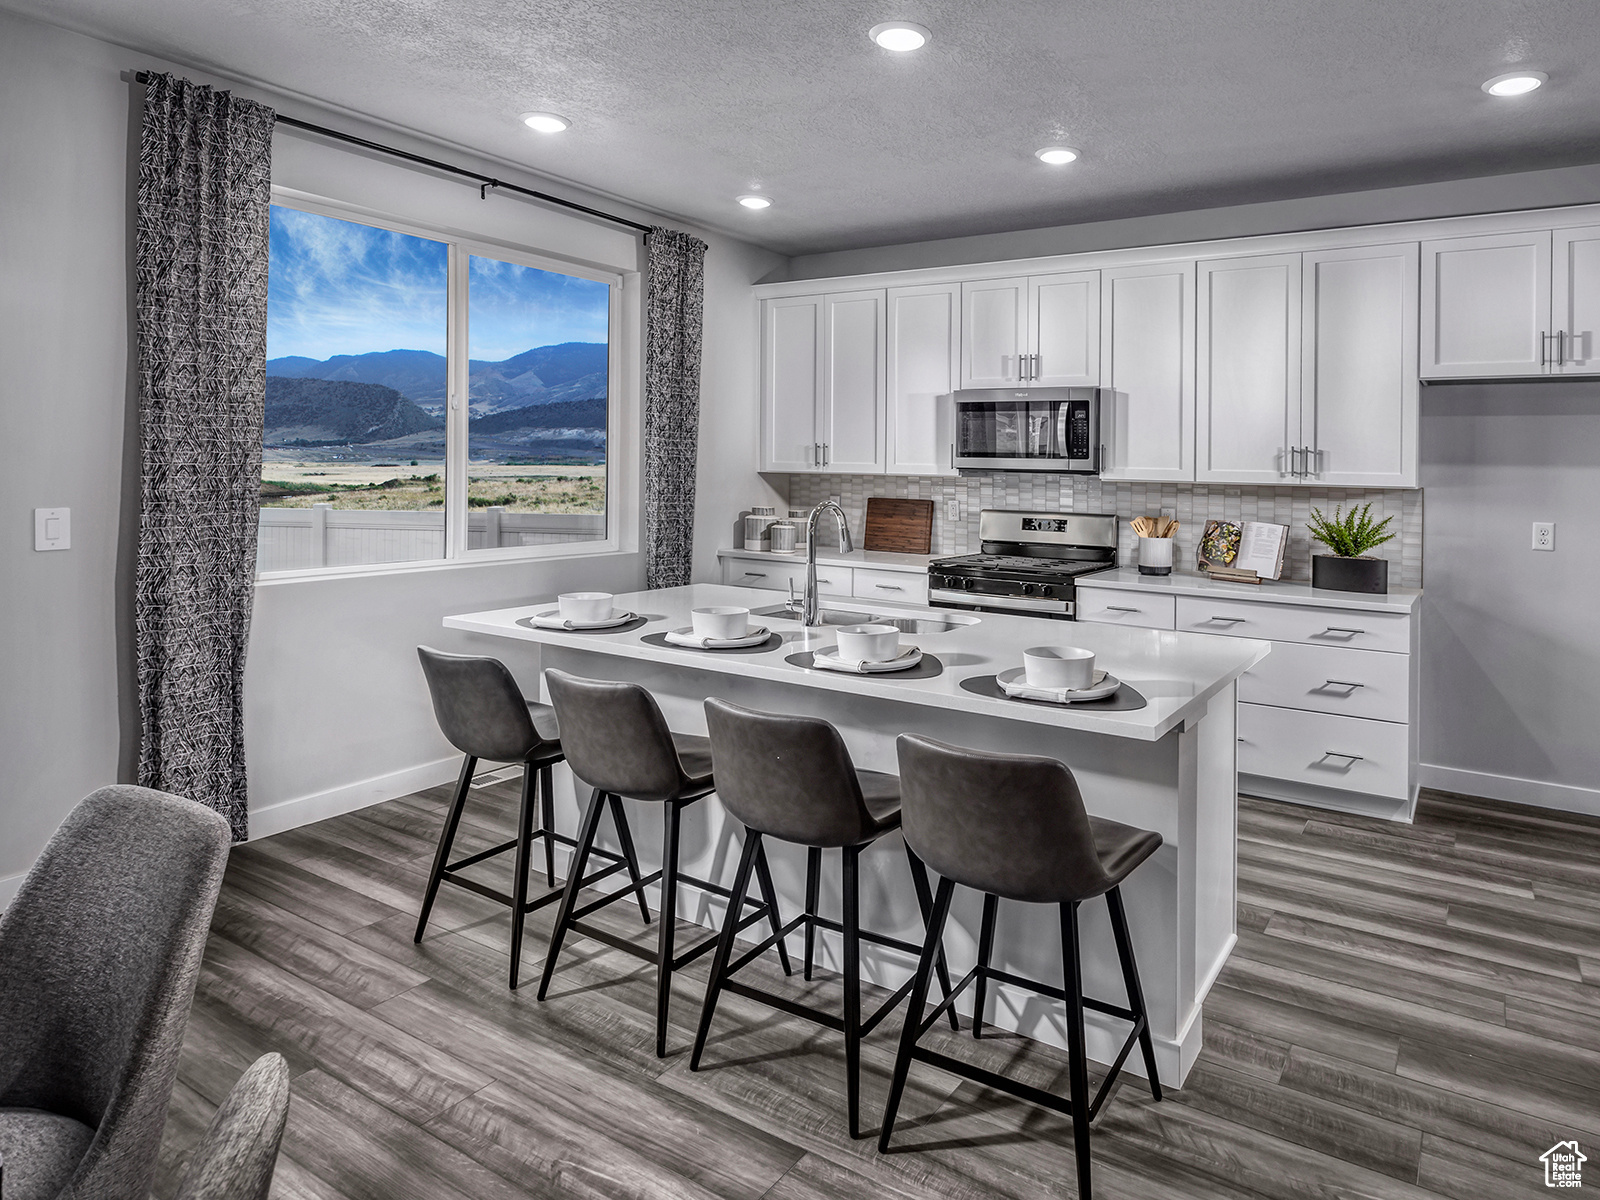 Kitchen with appliances with stainless steel finishes, a mountain view, a kitchen island with sink, dark hardwood / wood-style floors, and white cabinets